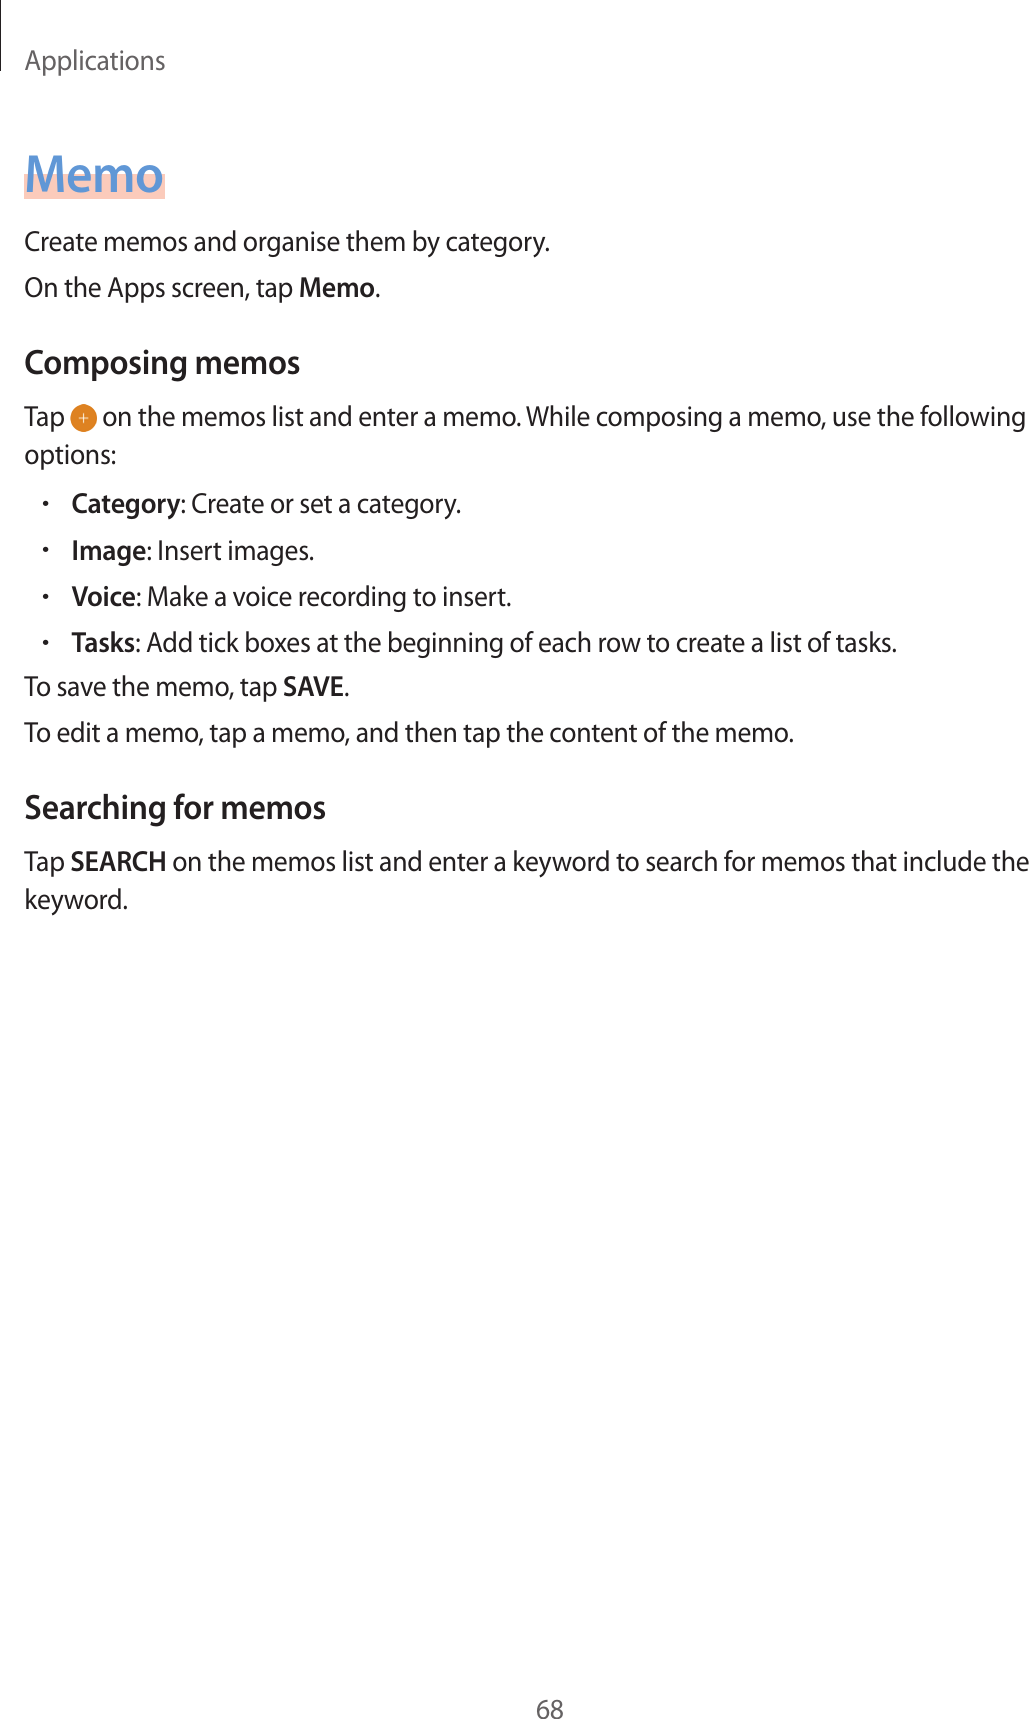 Applications68MemoCreate memos and organise them by category.On the Apps screen, tap Memo.Composing memosTap   on the memos list and enter a memo. While composing a memo, use the following options:•Category: Create or set a category.•Image: Insert images.•Voice: Make a voice recording to insert.•Tasks: Add tick boxes at the beginning of each row to create a list of tasks.To save the memo, tap SAVE.To edit a memo, tap a memo, and then tap the content of the memo.Searching for memosTap SEARCH on the memos list and enter a keyword to search for memos that include the keyword.